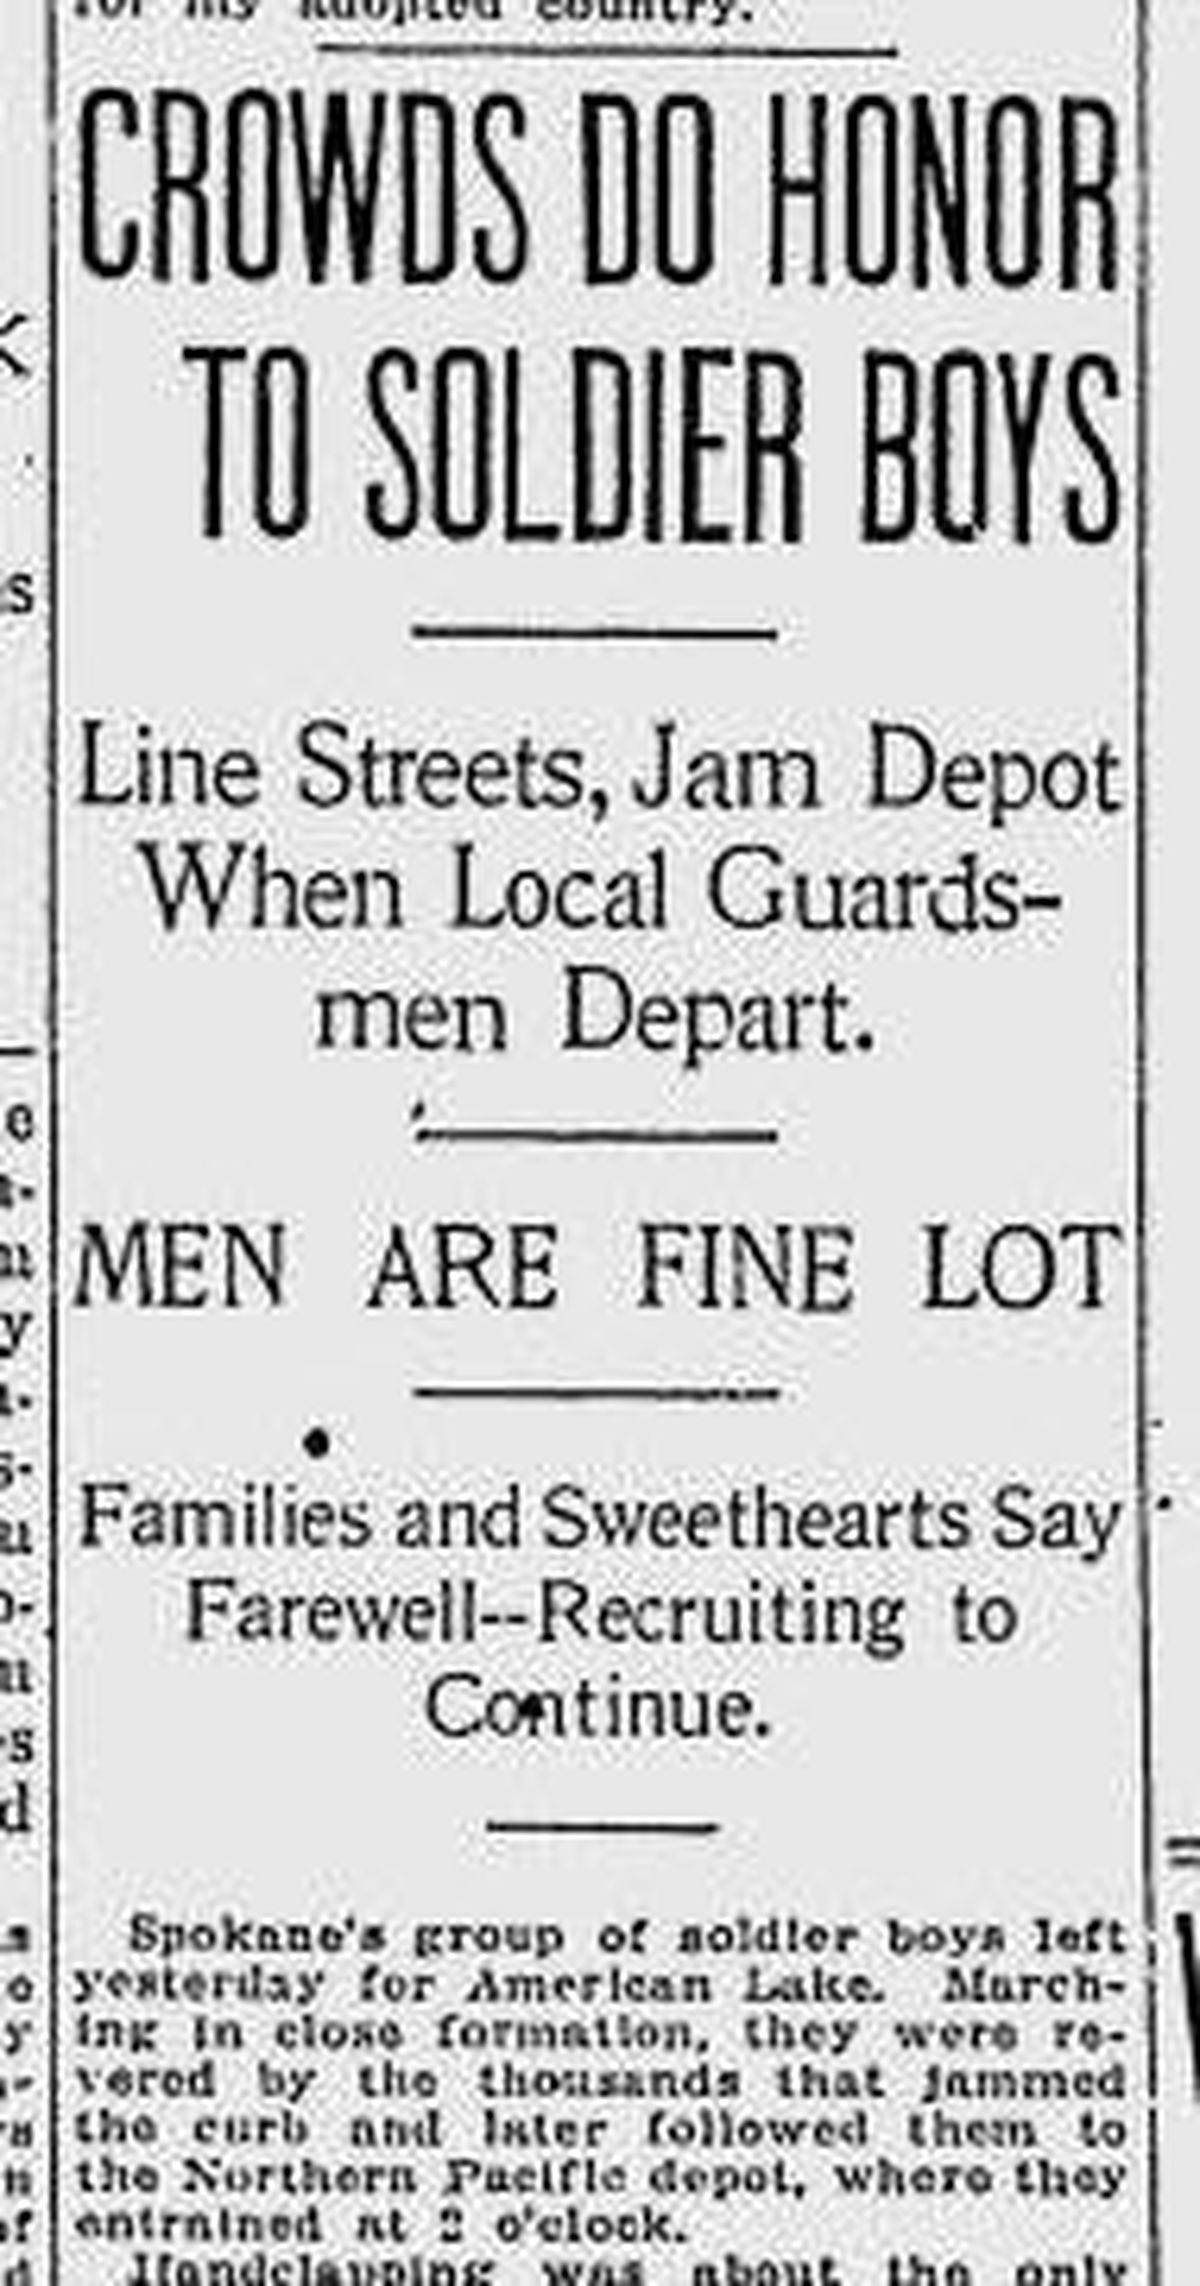 A group of Washington National Guard members from Spokane left for American Lake, the site of the big army training camp near Tacoma (soon to be renamed Camp Lewis and later Fort Lewis), The Spokesman-Review reported on March 31, 1917. (Spokesman-Review archives)